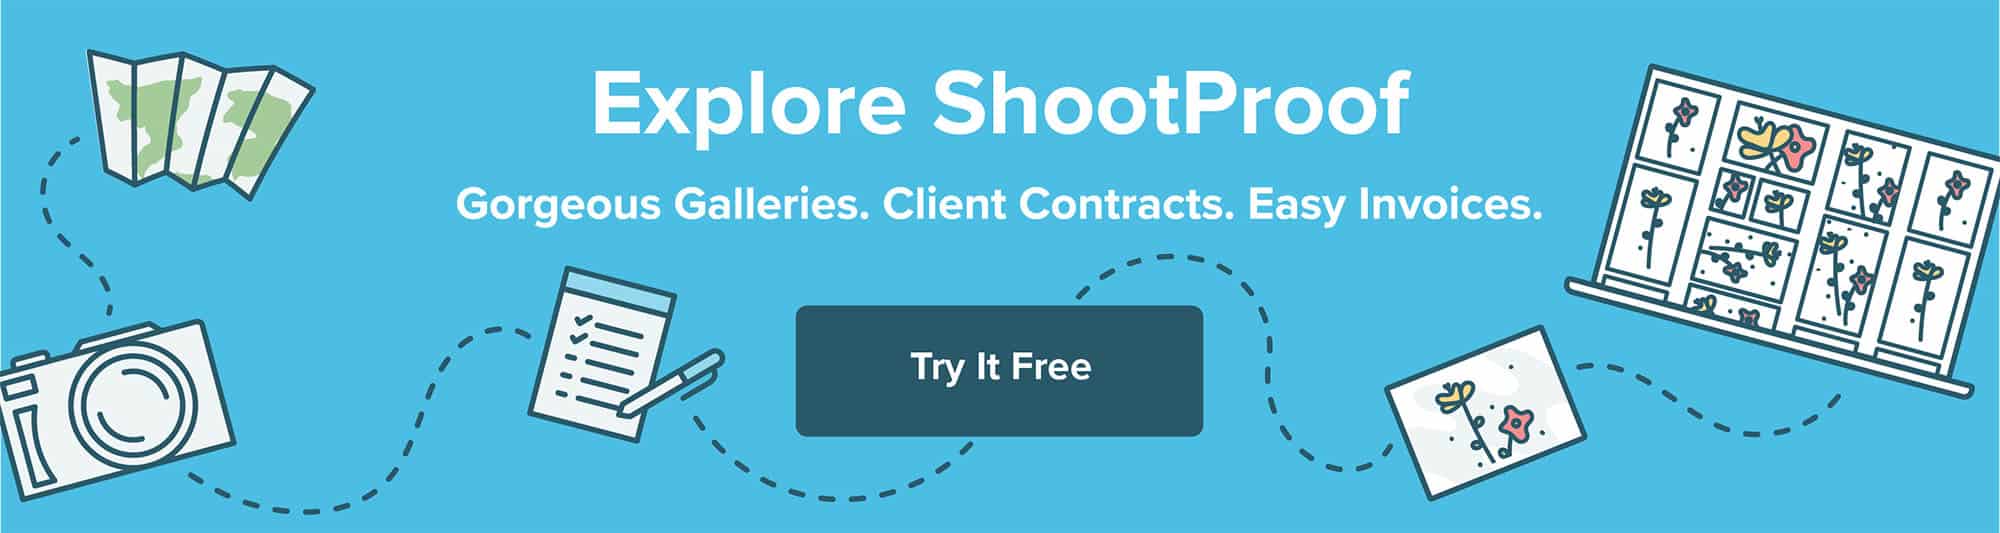 Sell Photos Online - Try ShootProof FREE - Online Galleries for Photographers